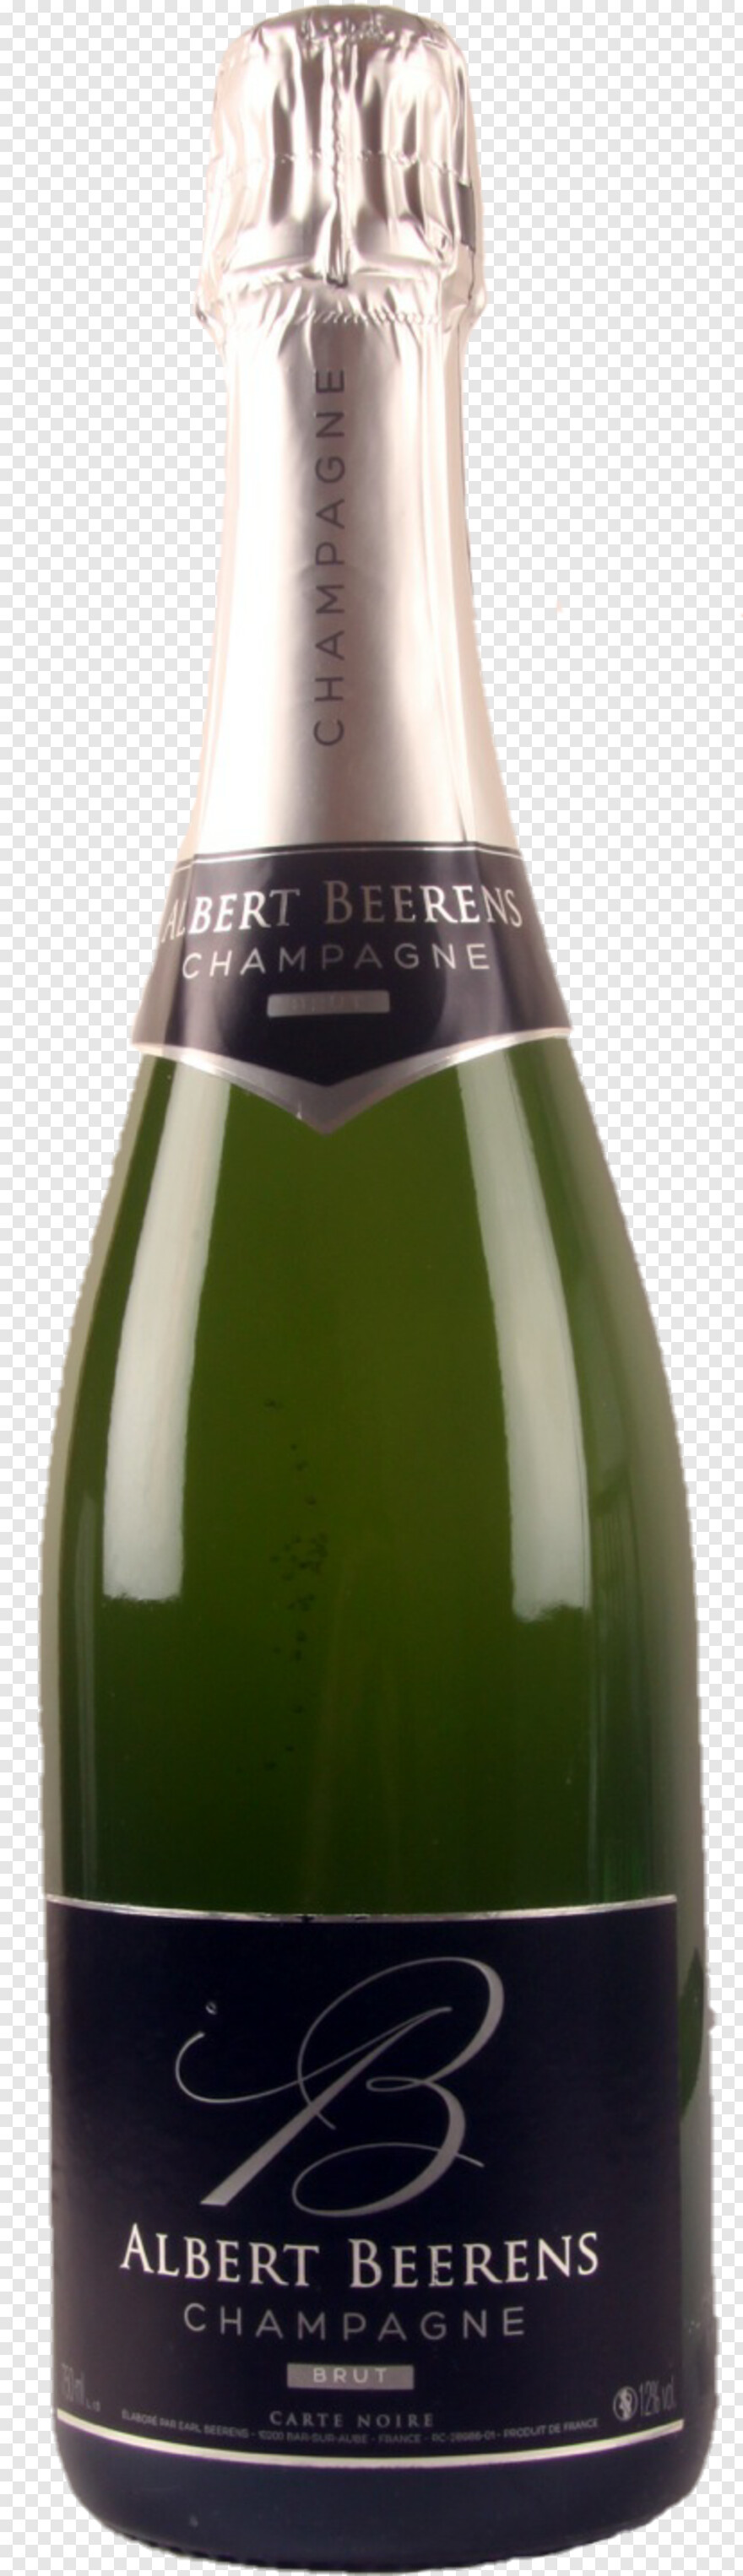 champagne-popping # 326460